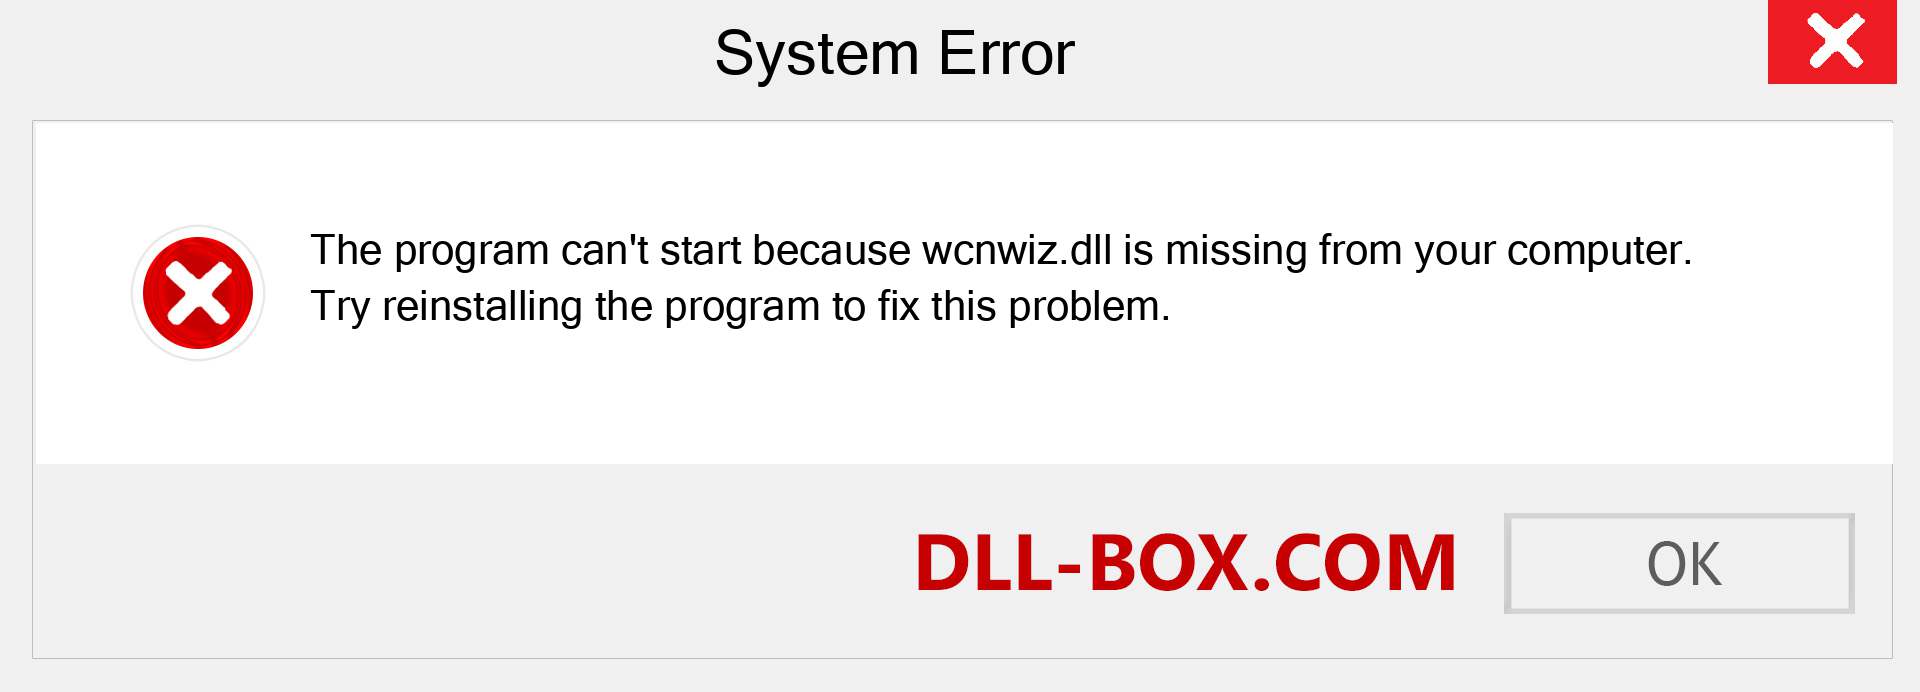  wcnwiz.dll file is missing?. Download for Windows 7, 8, 10 - Fix  wcnwiz dll Missing Error on Windows, photos, images